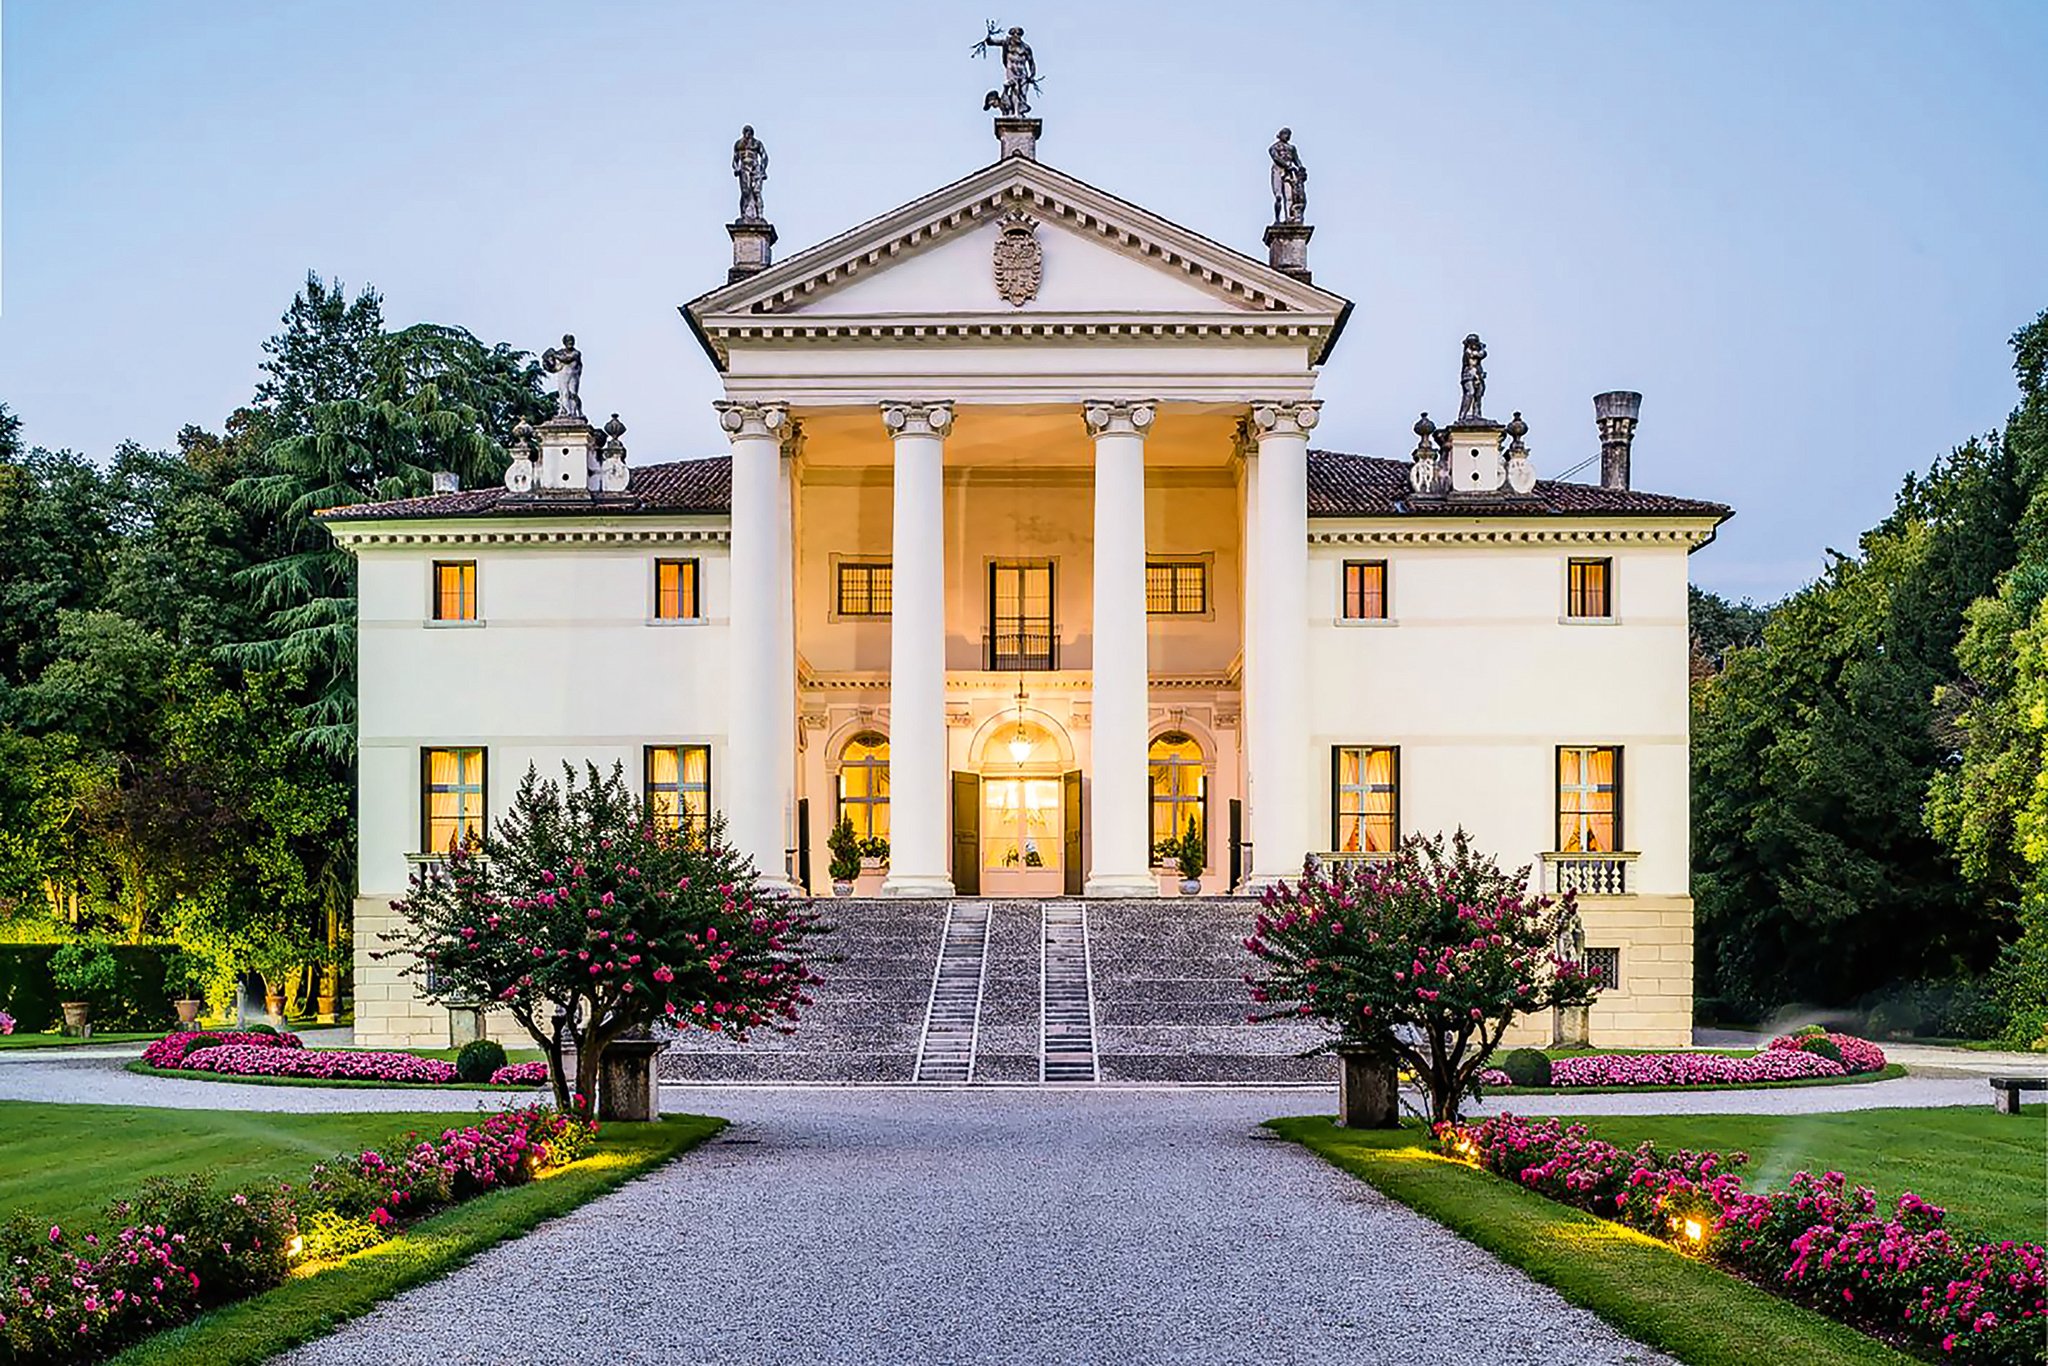 The Villa Sandi, home to the producer of the same name. The building from the early 17th century was built in the style of the Renaissance architect Andrea Palladio.